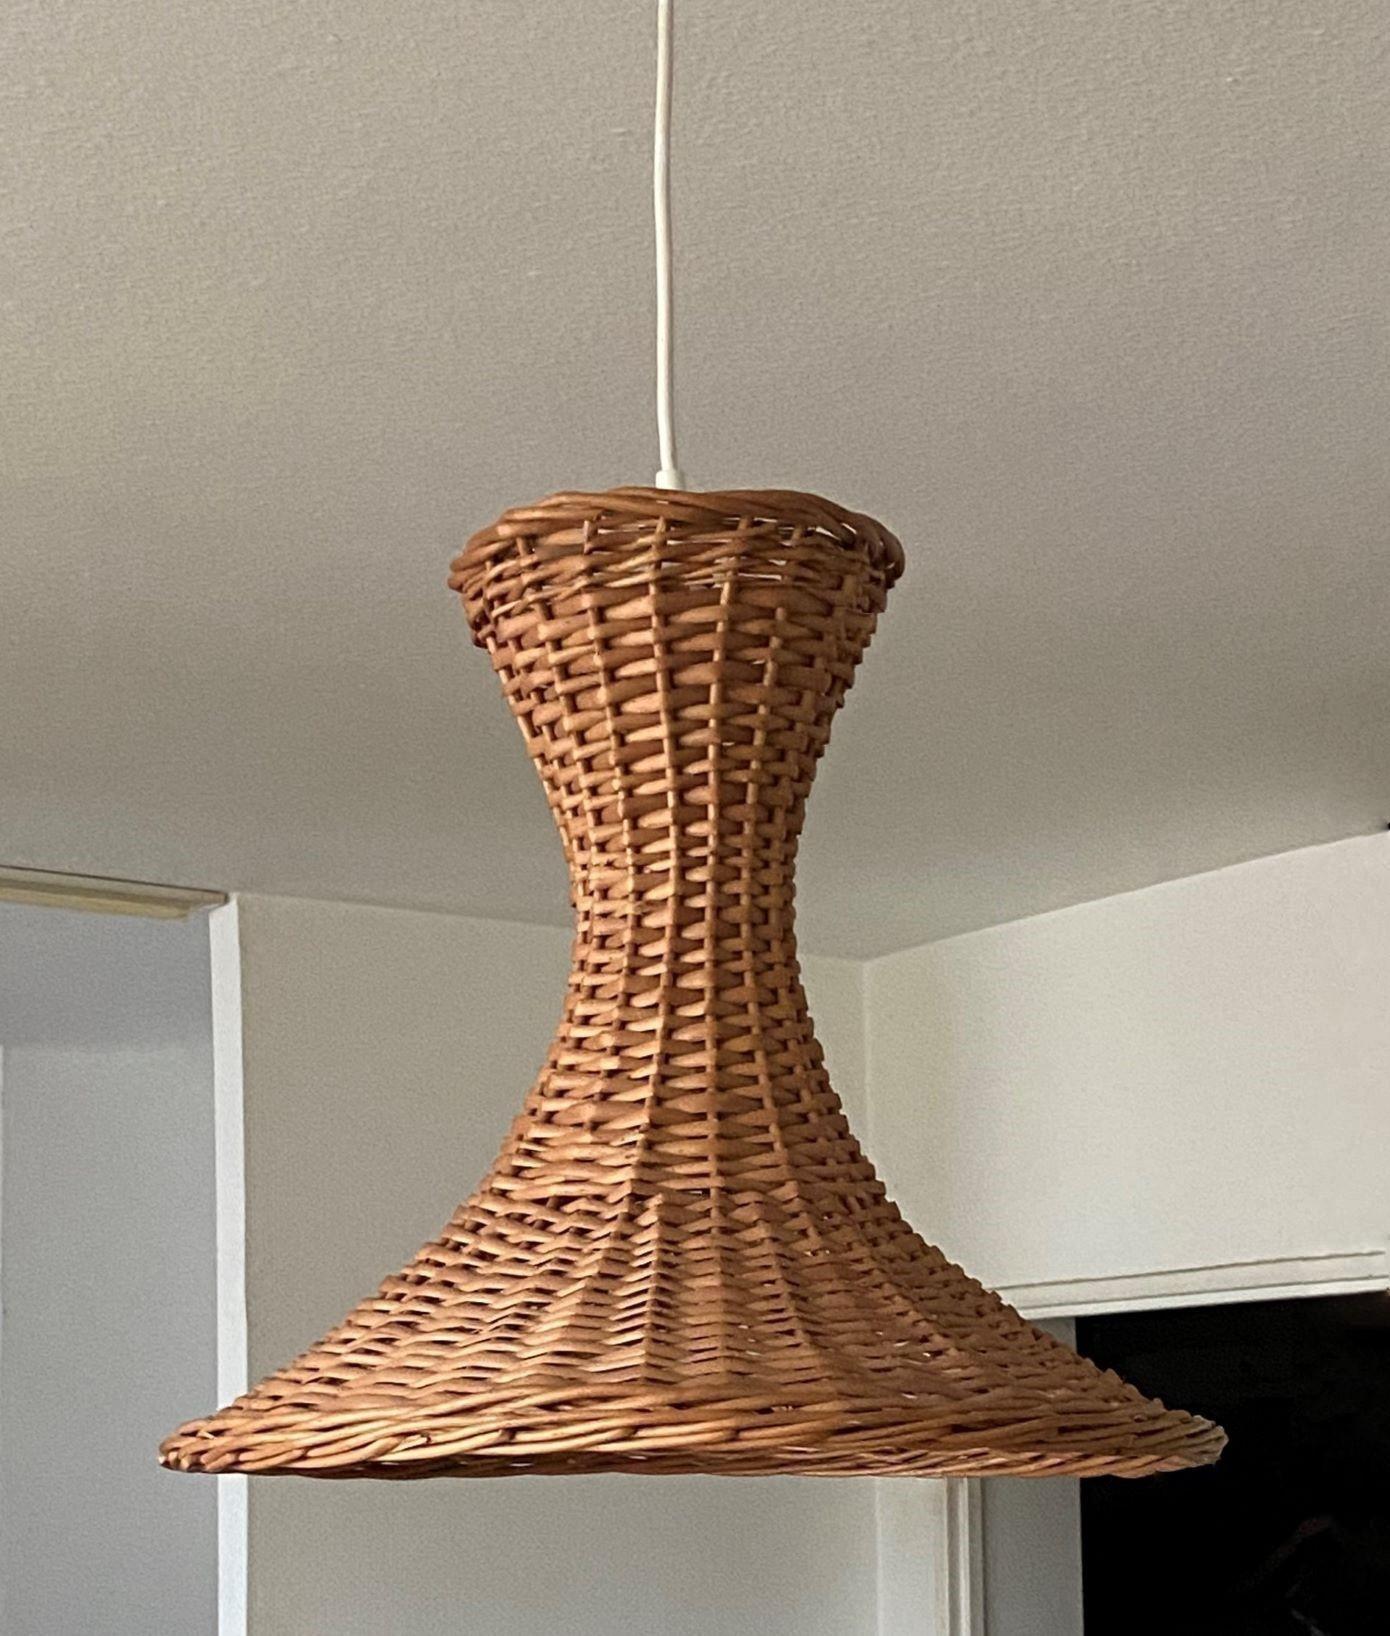 Mid-century rattan pendant, Denmark, 1960s. This beautiful suspension lamp is entirely handcrafted in rattan with unsual design provinding a warm and pleasant light. The pendant is in fine vintage condition, no damages, rewired. It takes one large